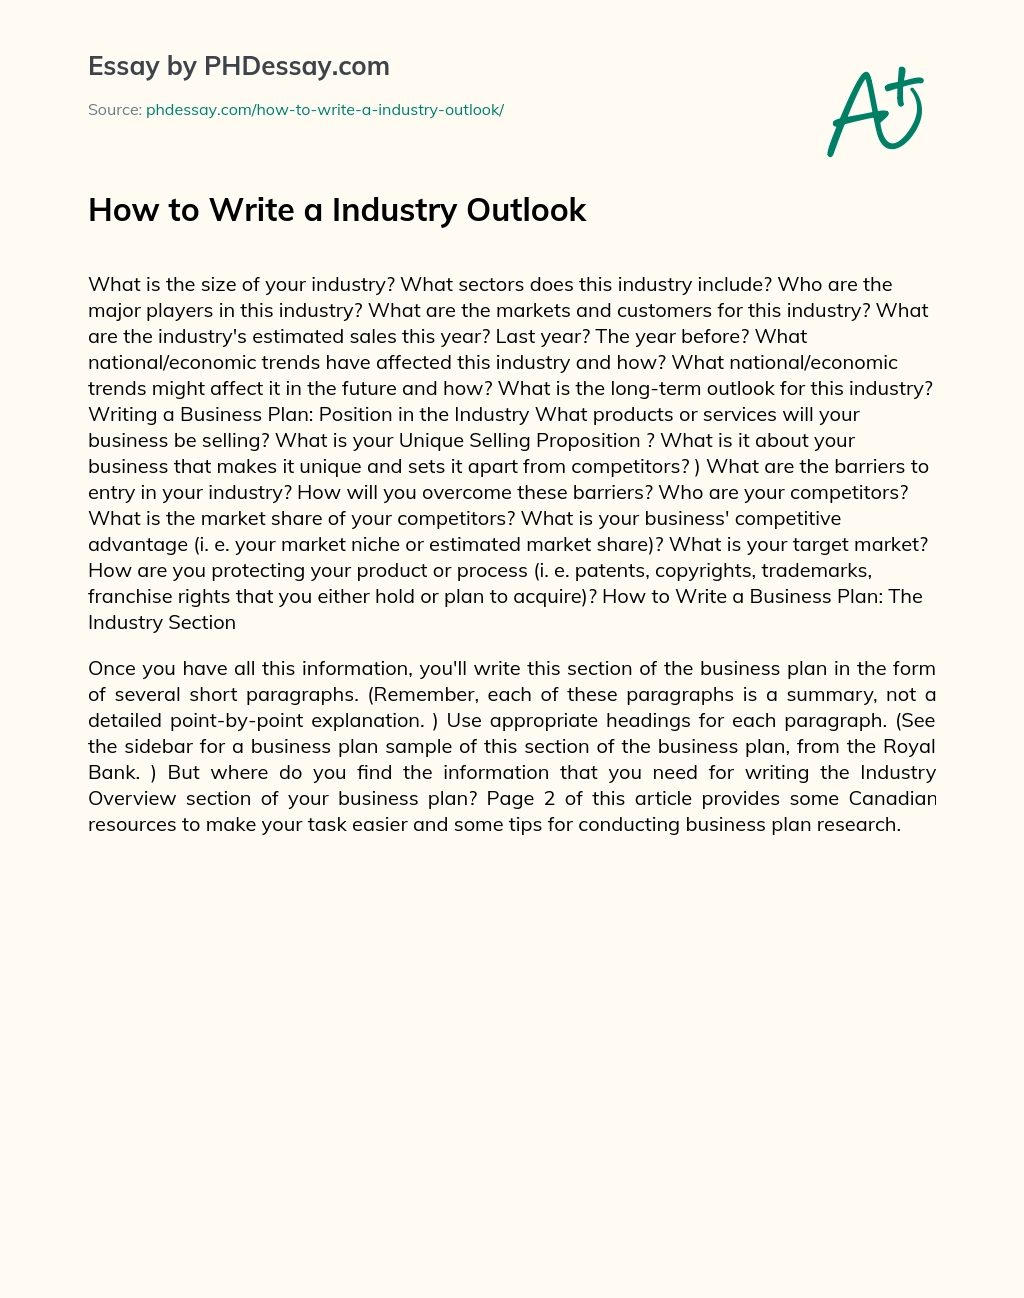 How to Write a Industry Outlook essay